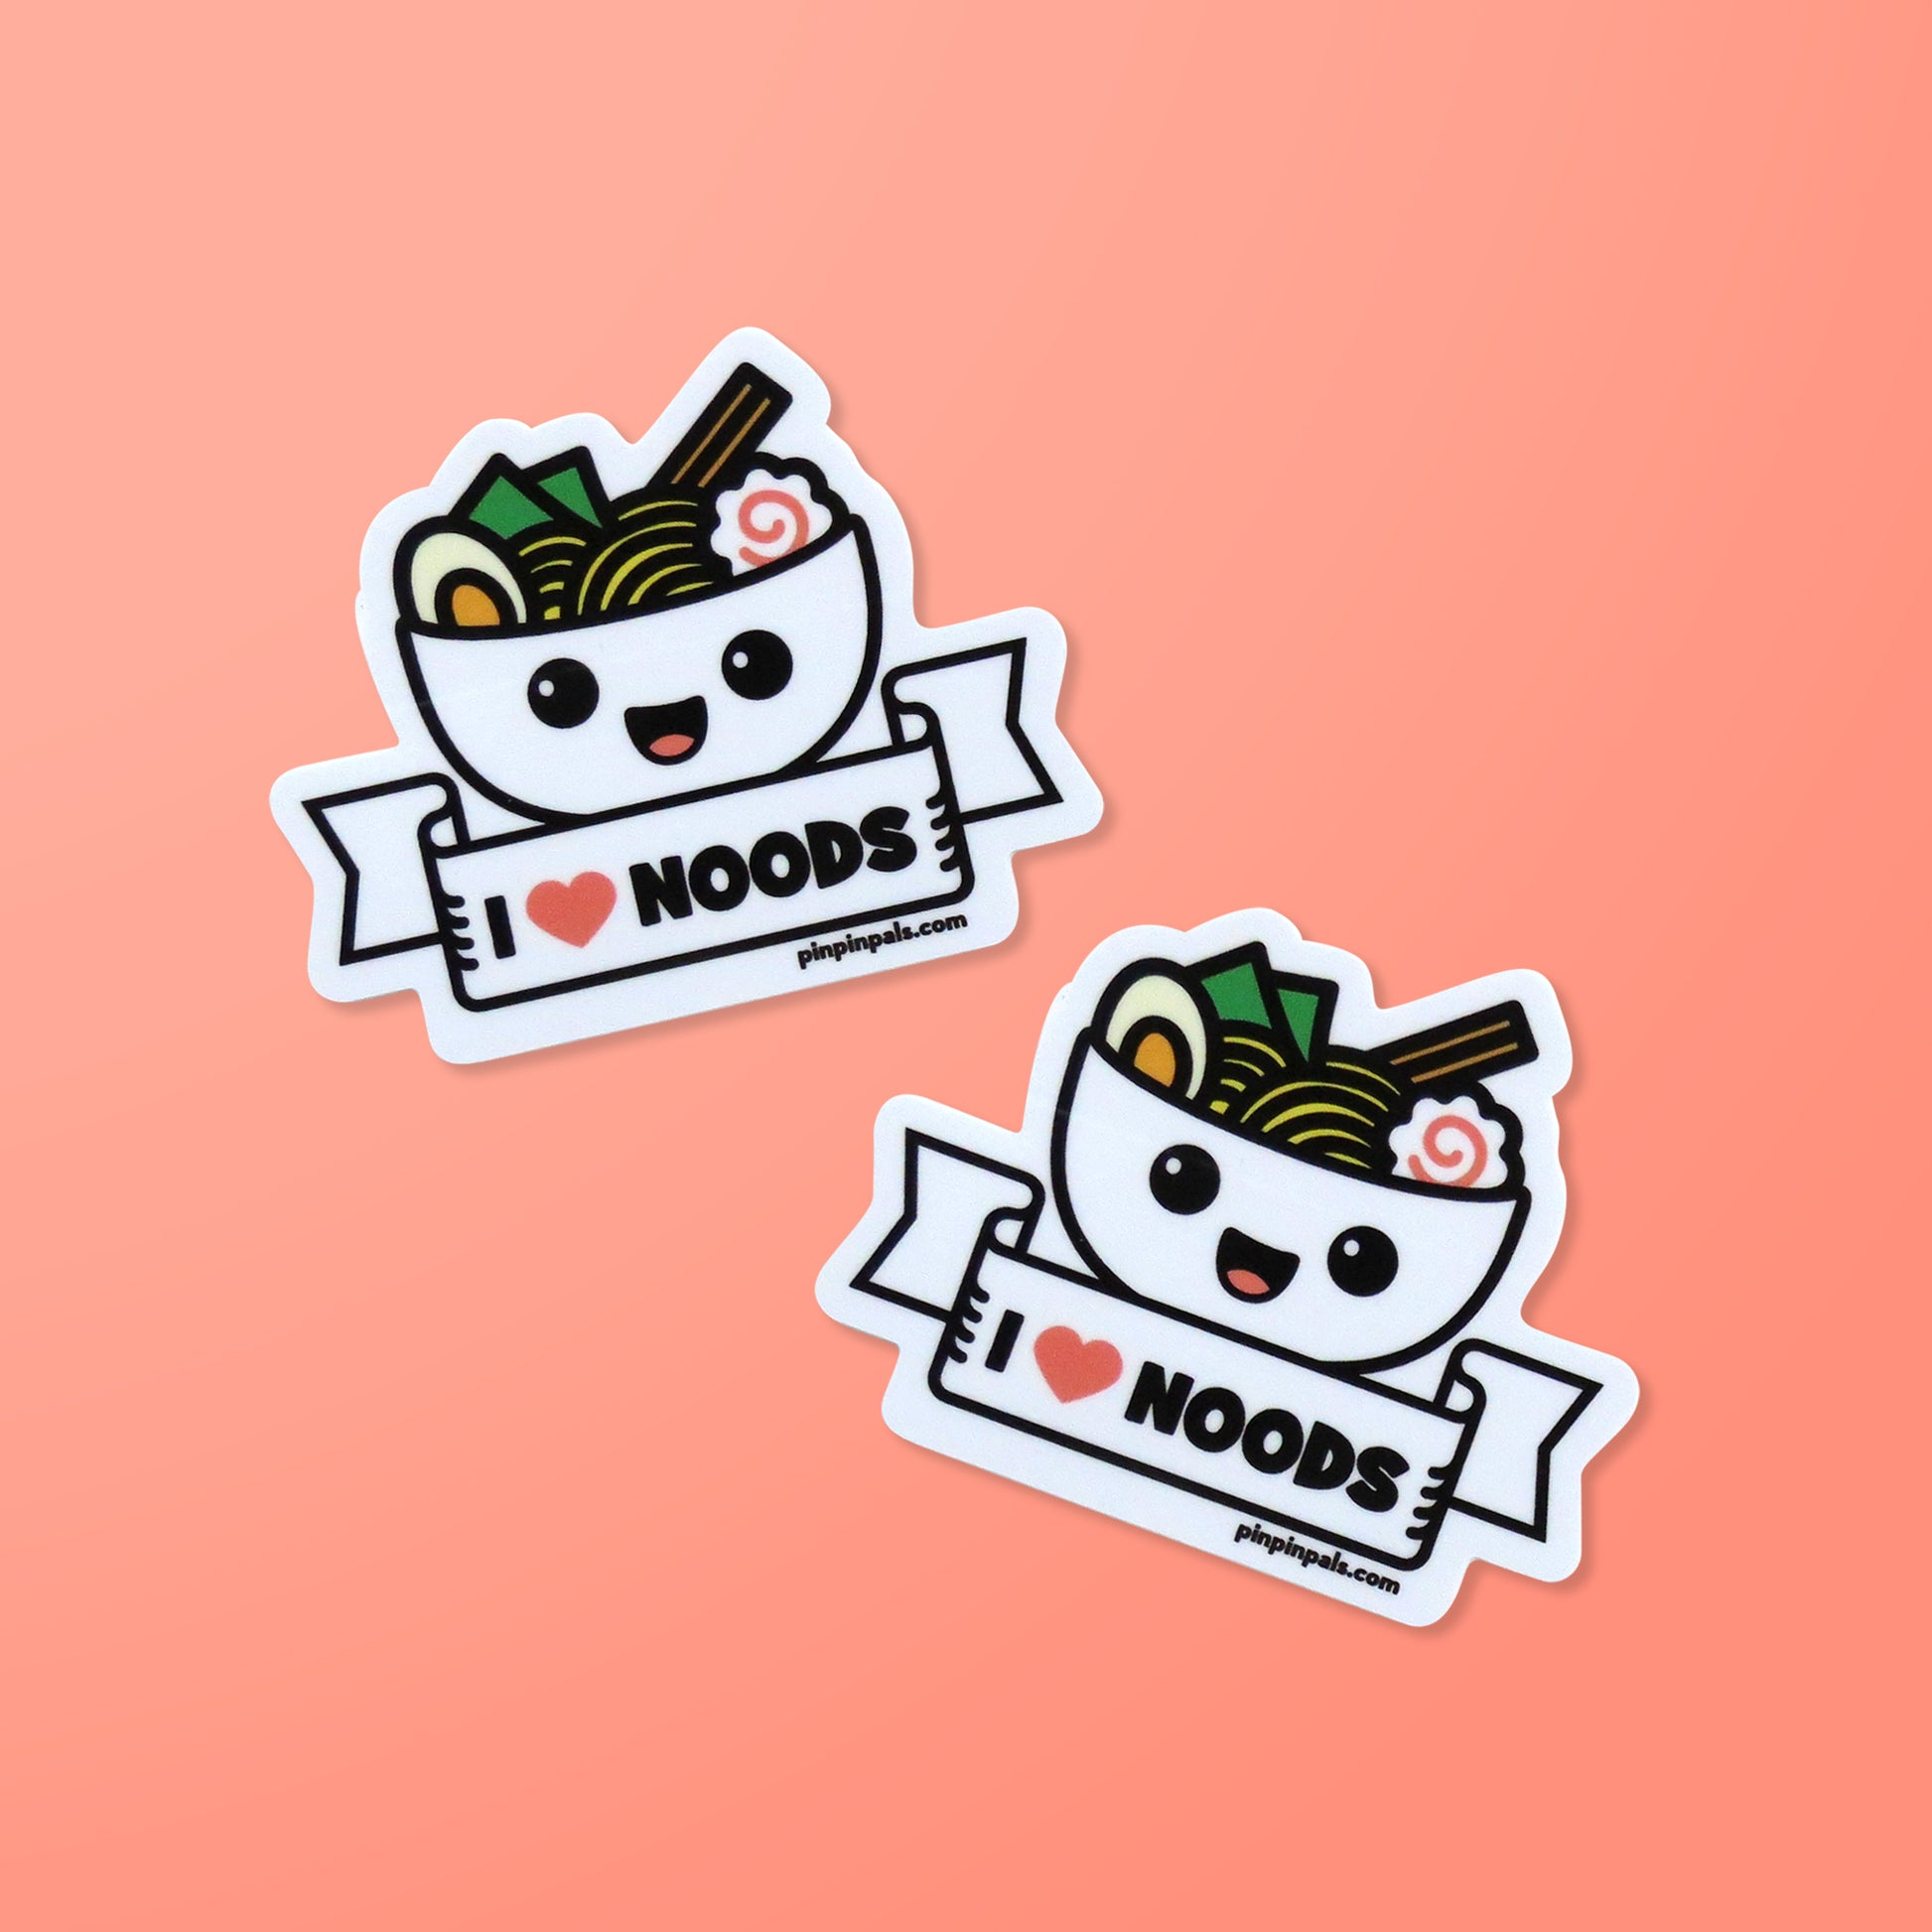 Two I Love Noods vinyl stickers on pink background